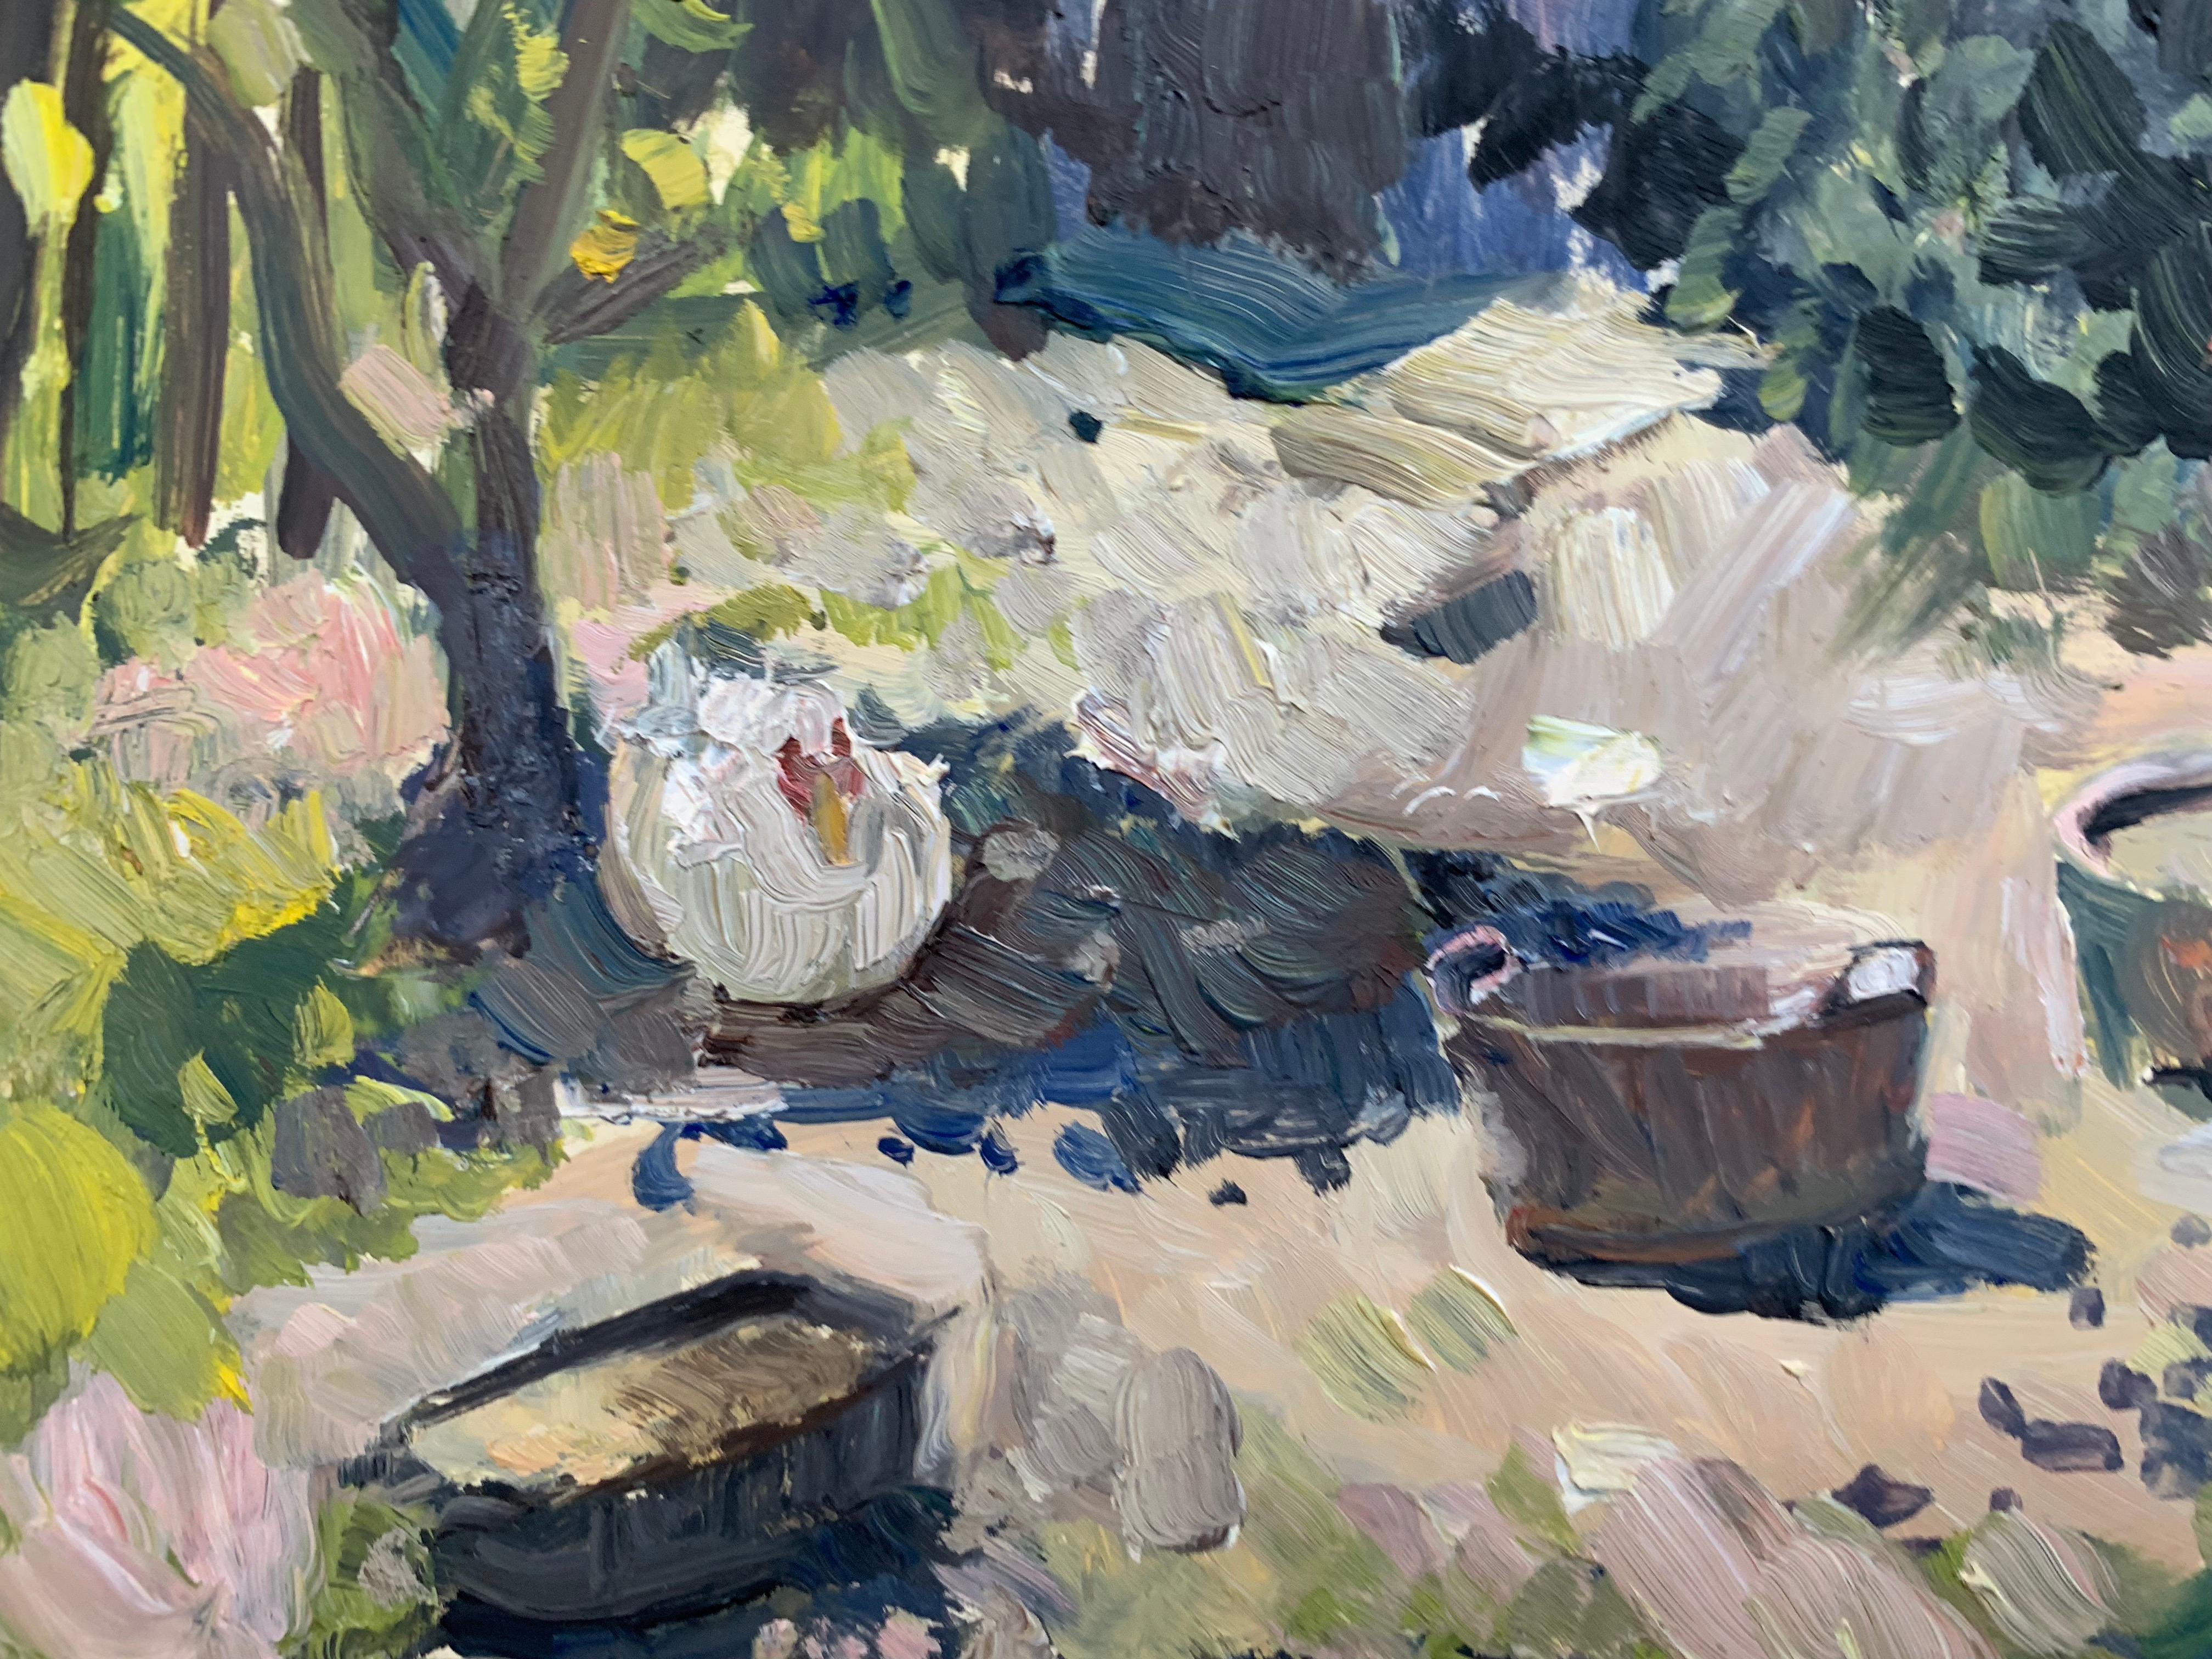 Painted en plein air, in Florence, Italy in April 2018. Rachel Personett paints the quaint, verdant, natural landscape where two ducks rest upon buckets. A contemporary painting of an old-fashioned scene.

Rachel Personett was born in Hawaii, but